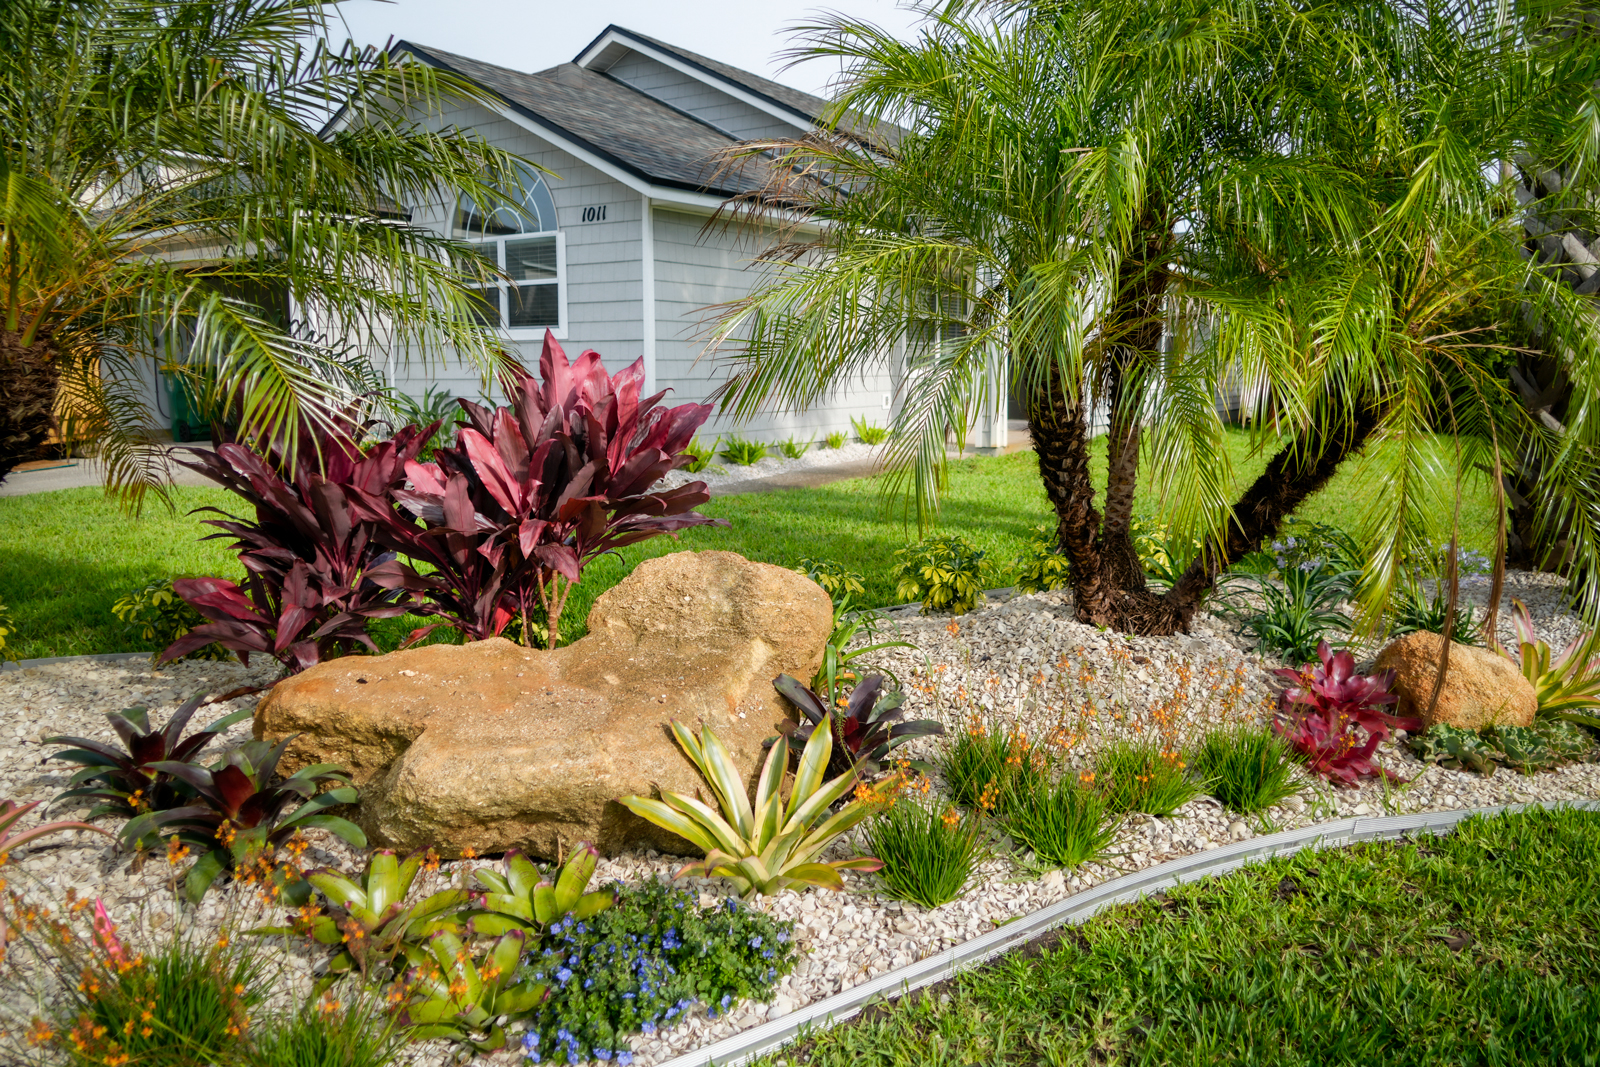 An exotic rock installation featuring unique, colorful stones that serve as an eye-catching centerpiece in a modern garden setting